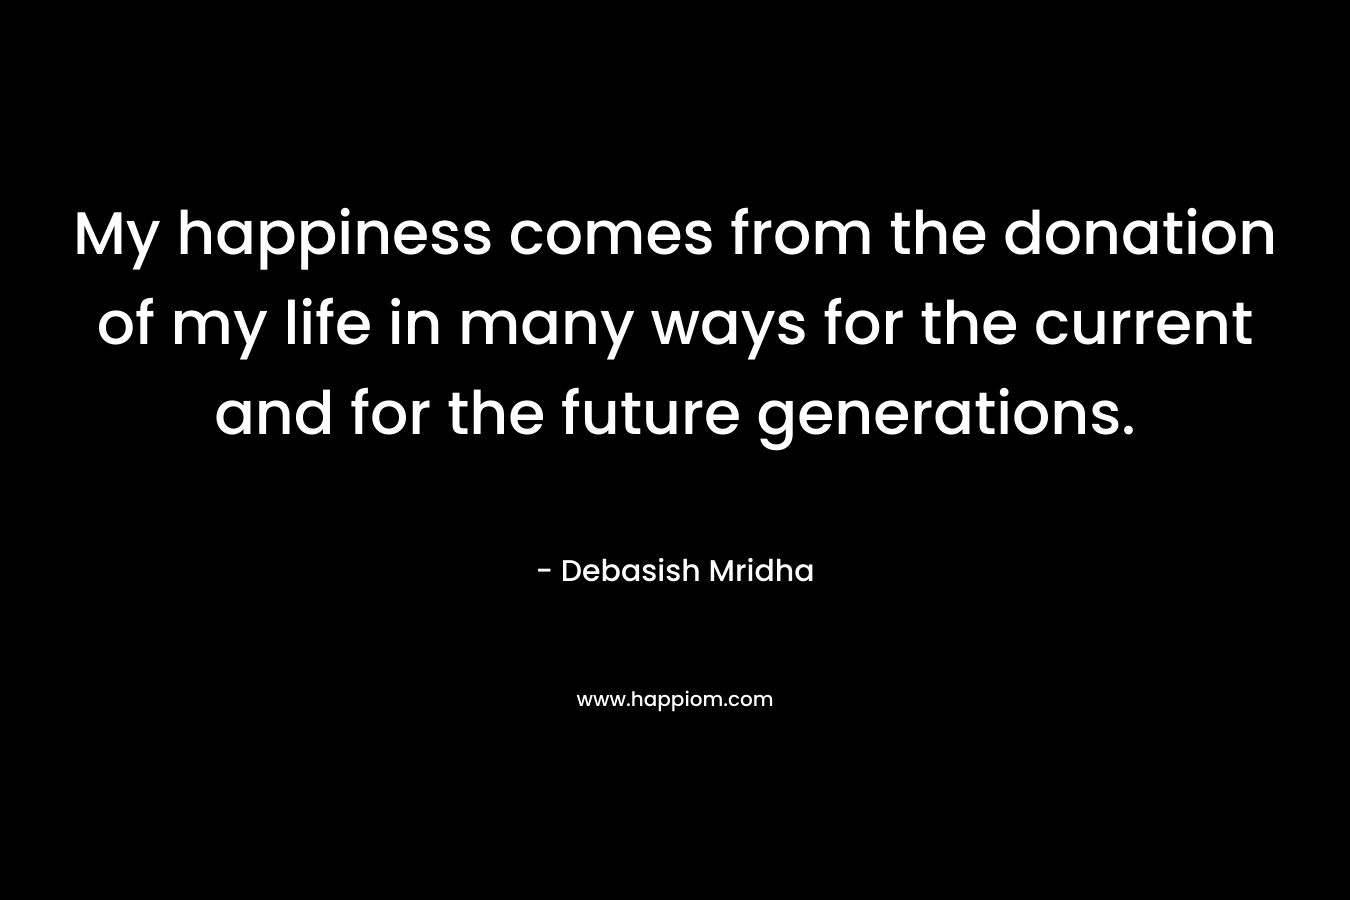 My happiness comes from the donation of my life in many ways for the current and for the future generations. – Debasish Mridha